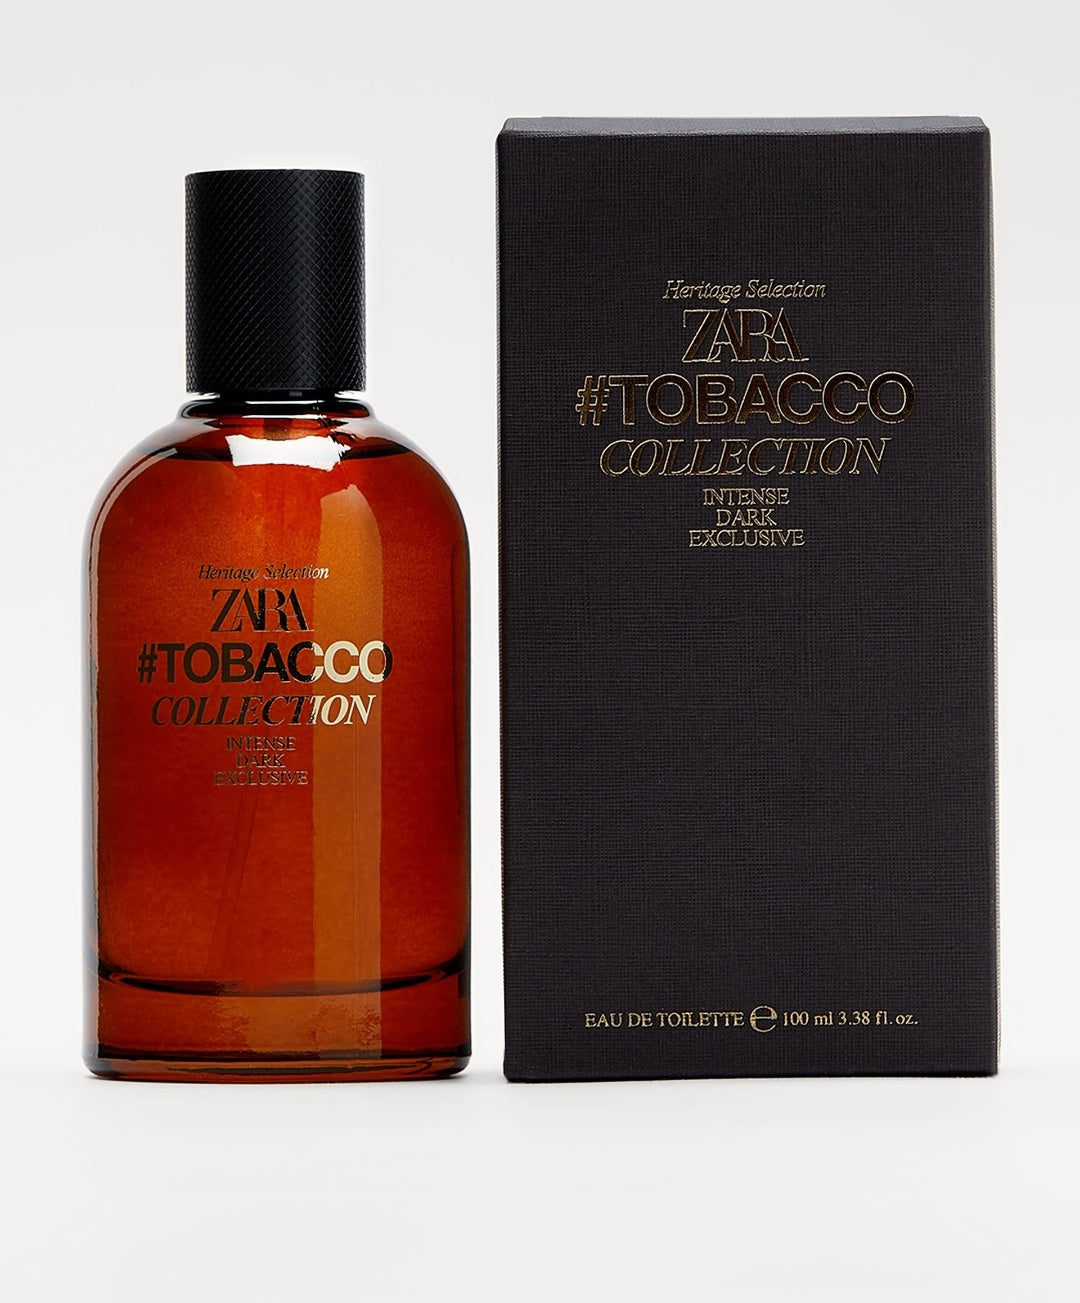 Zara Tobacco Collection Intense Dark 100ml (Packed in gift box with personalized name)